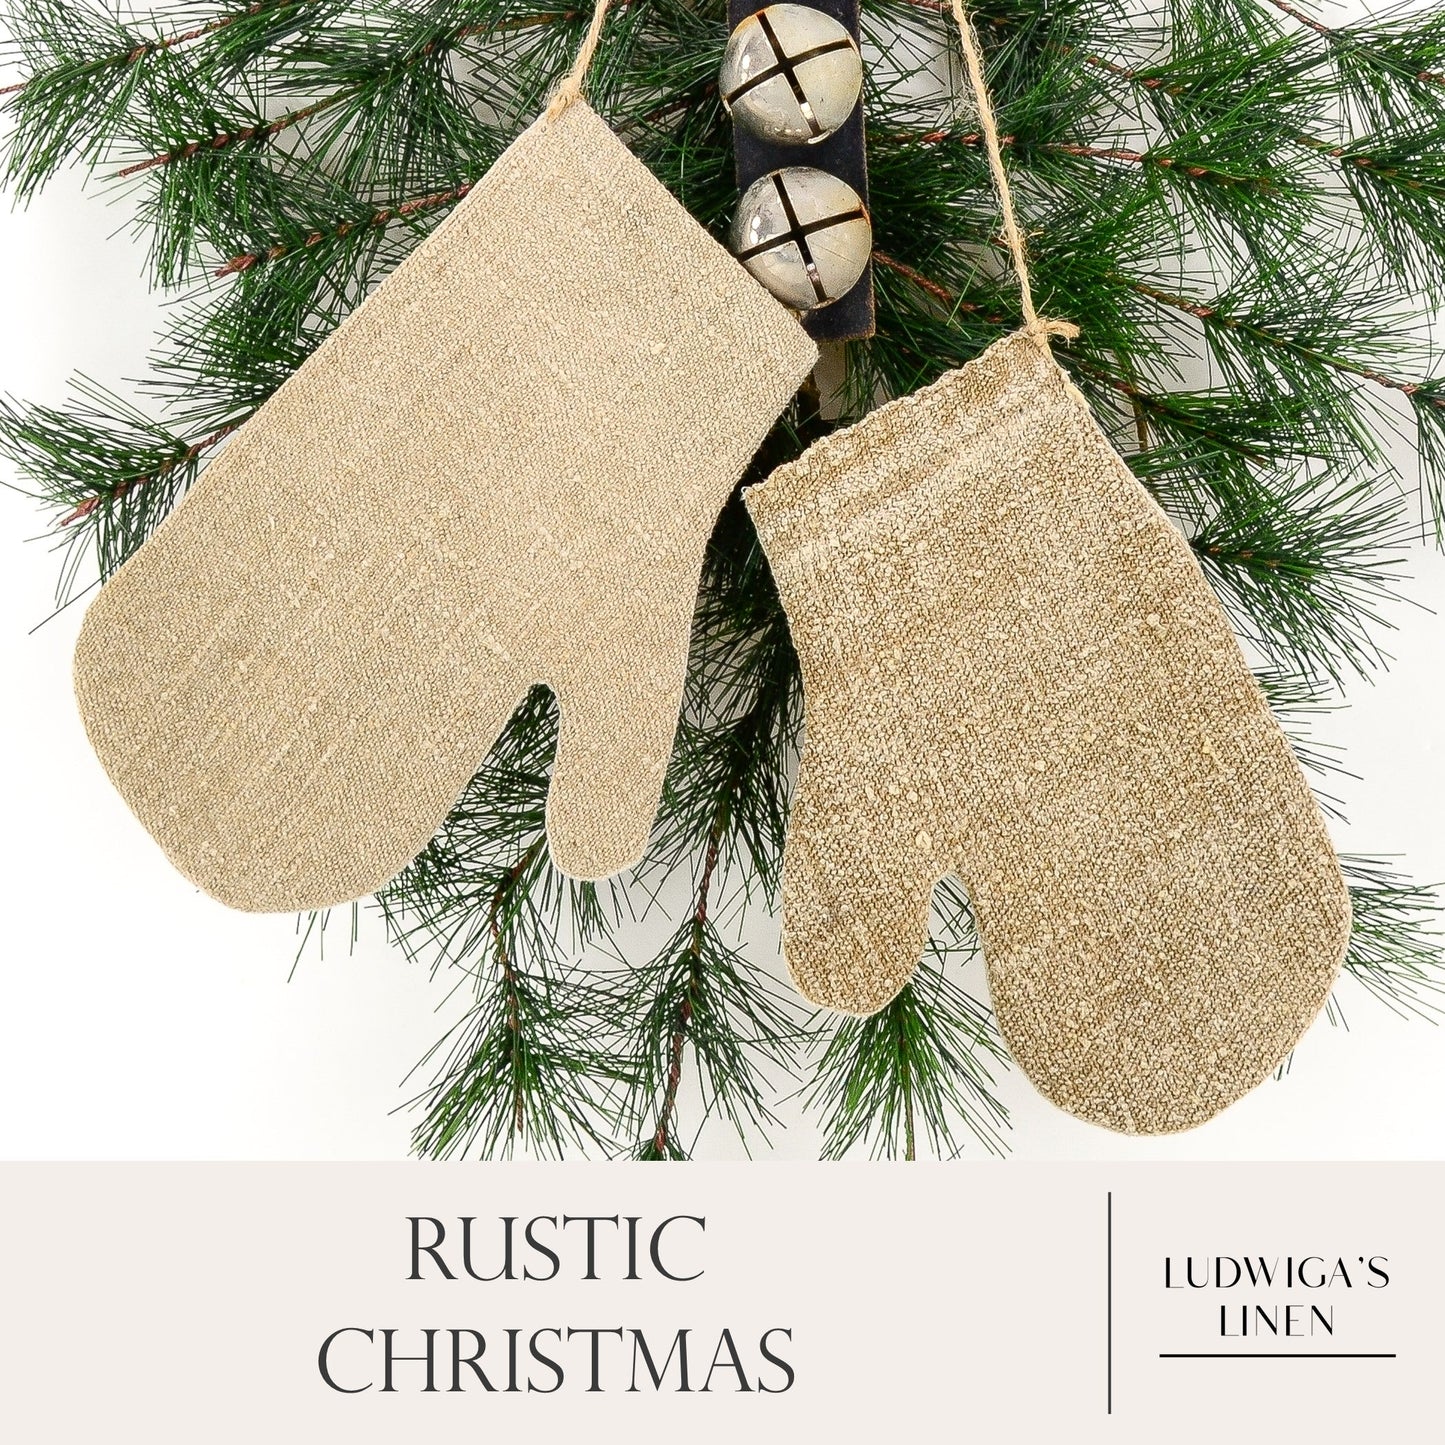 Christmas/holiday ornament - two antique European grain sack linen mittens fastened together with twine